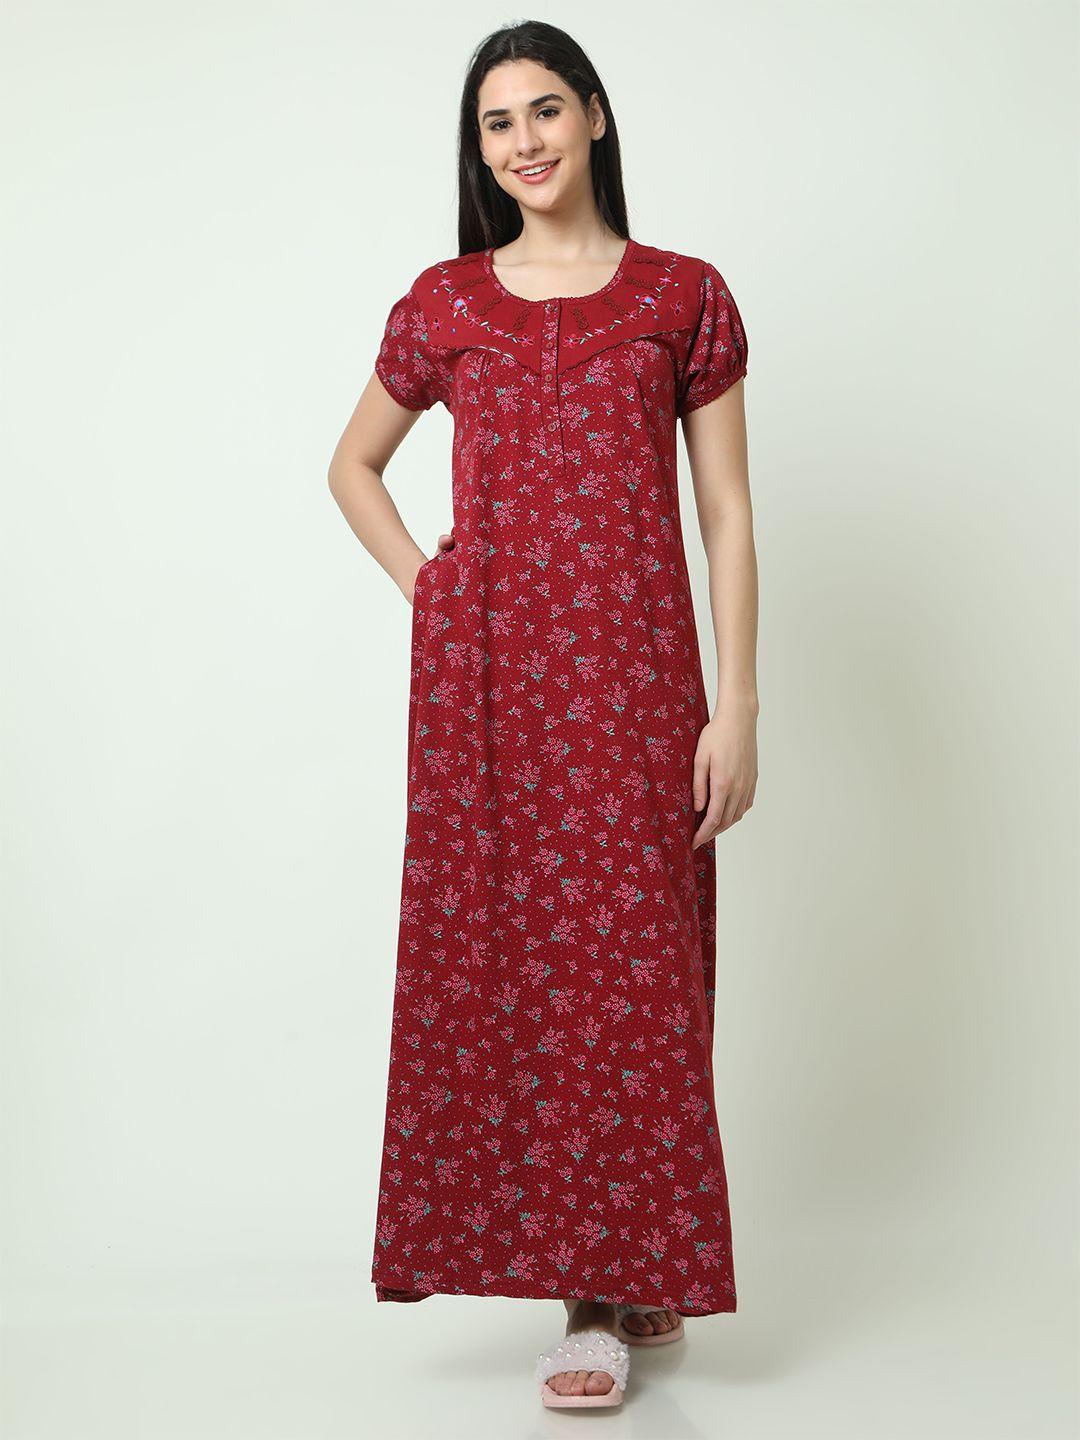 9shines label floral printed pure cotton maxi nightdress